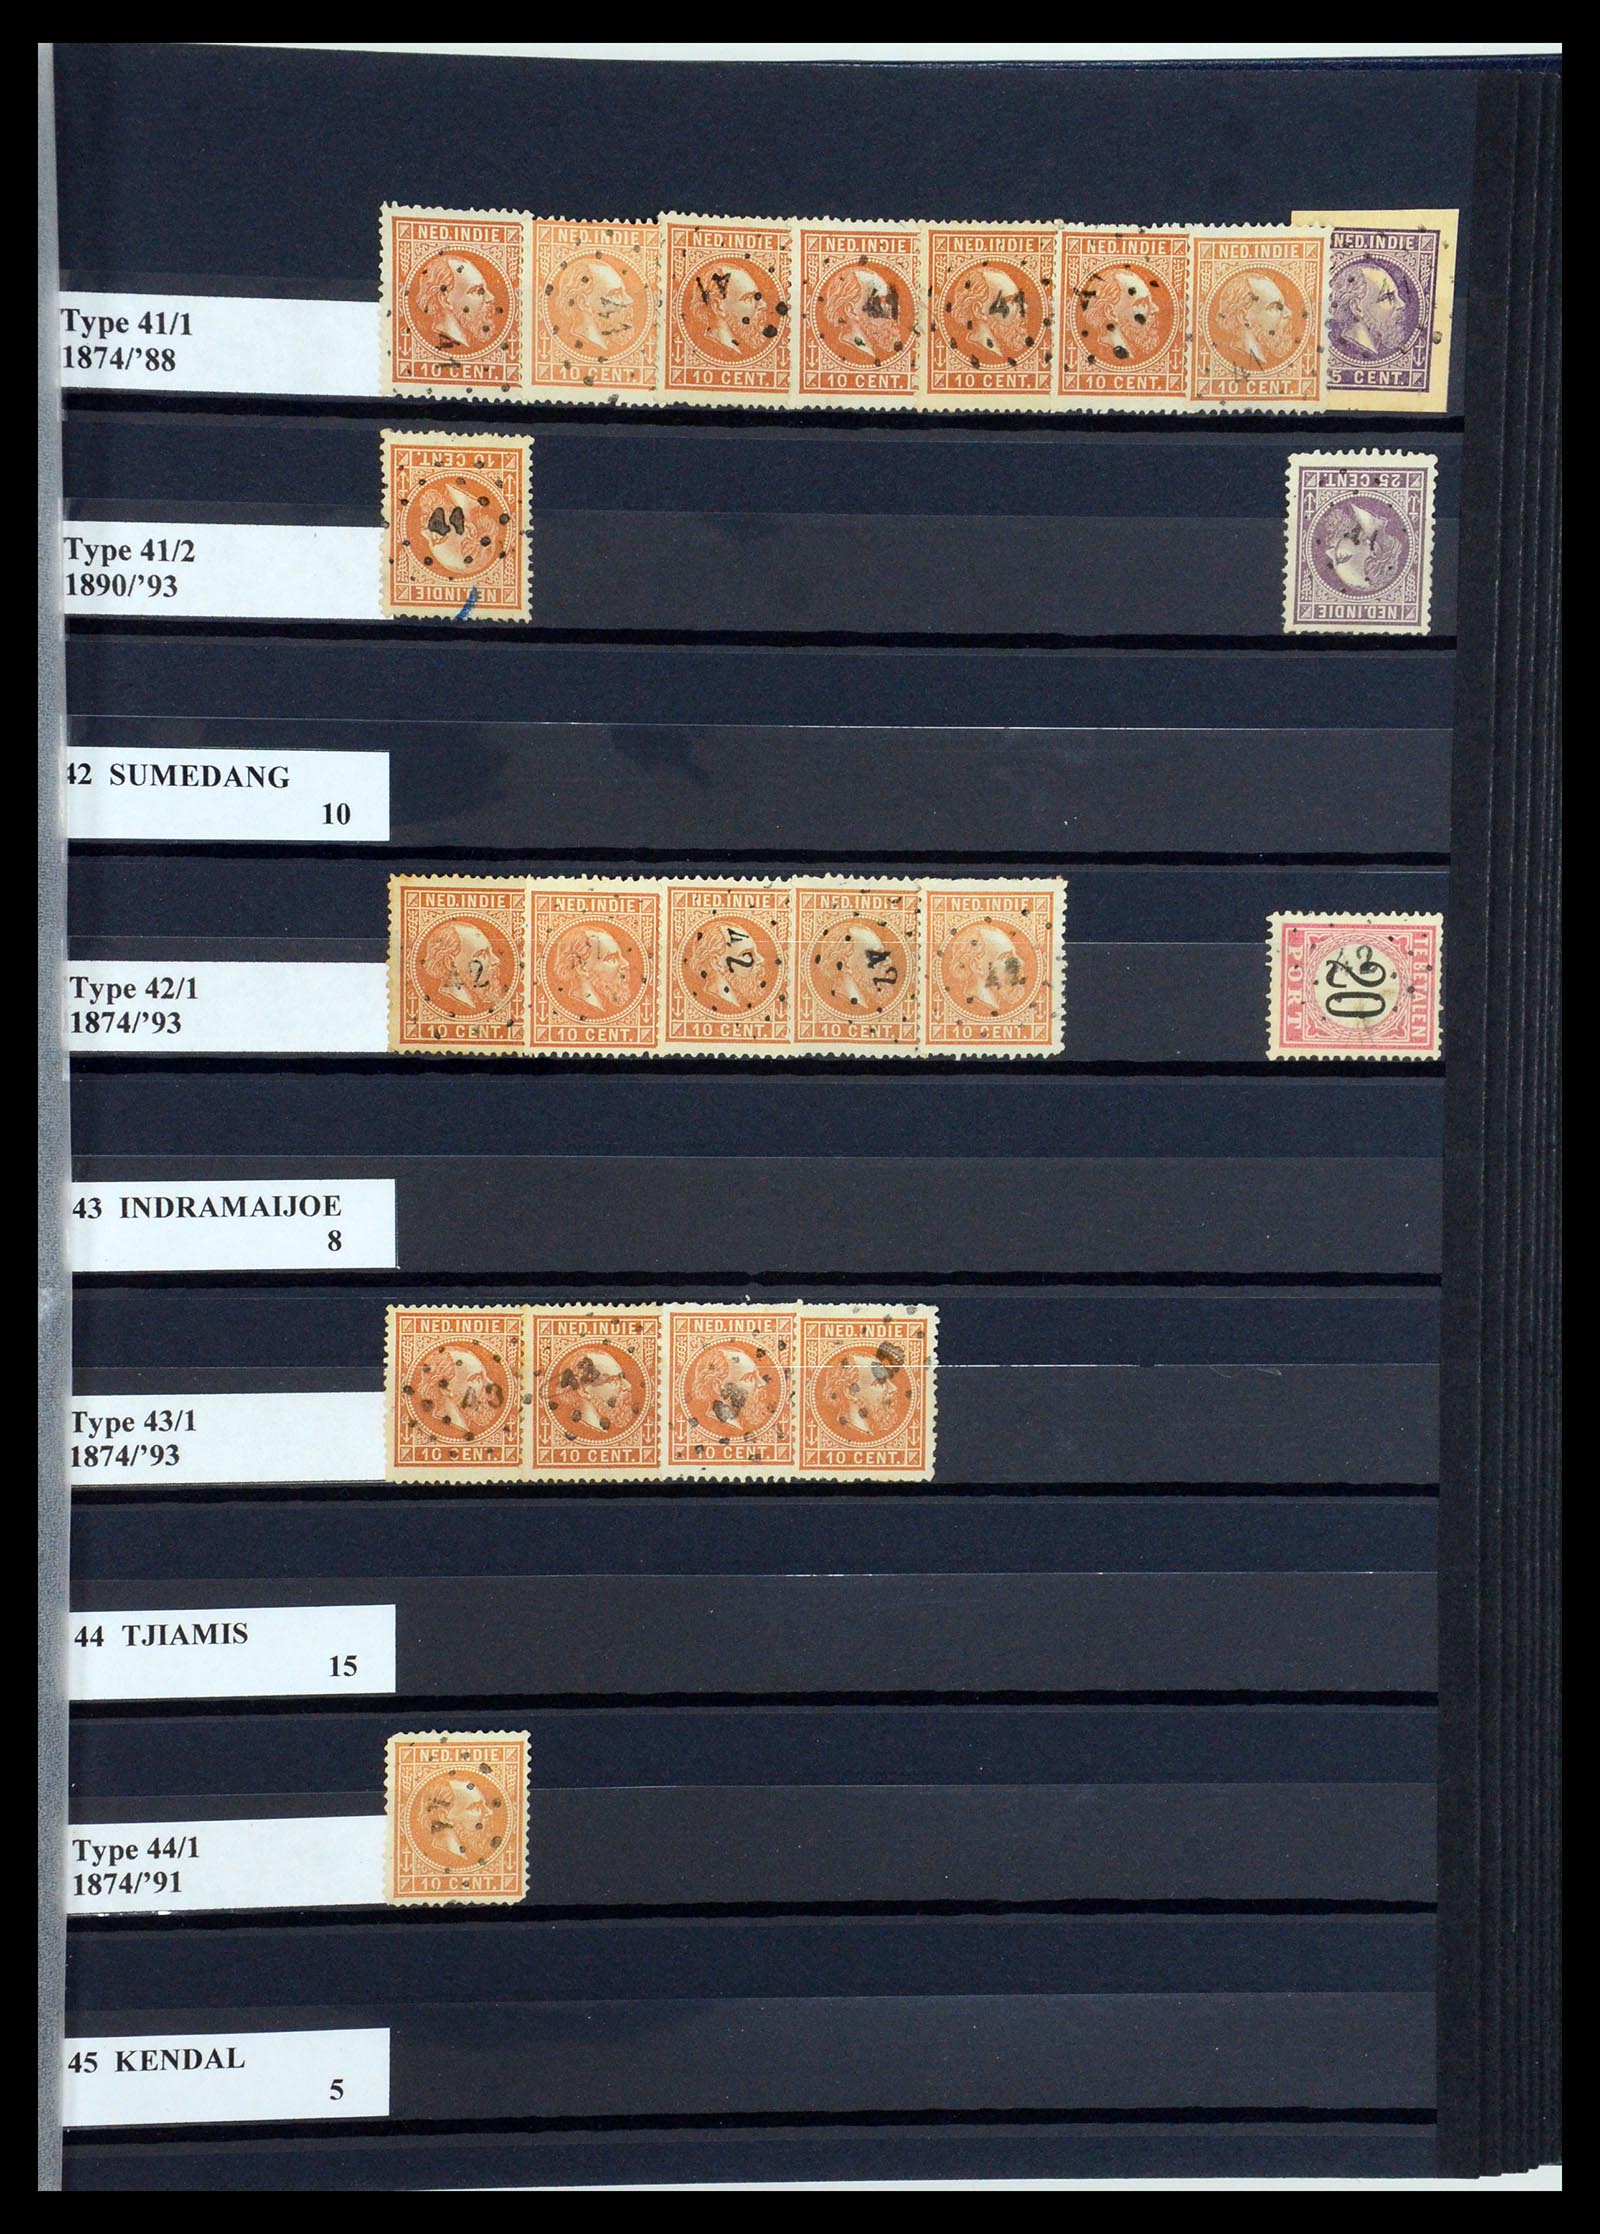 35602 017 - Stamp Collection 35602 Dutch east Indies numeral cancels.